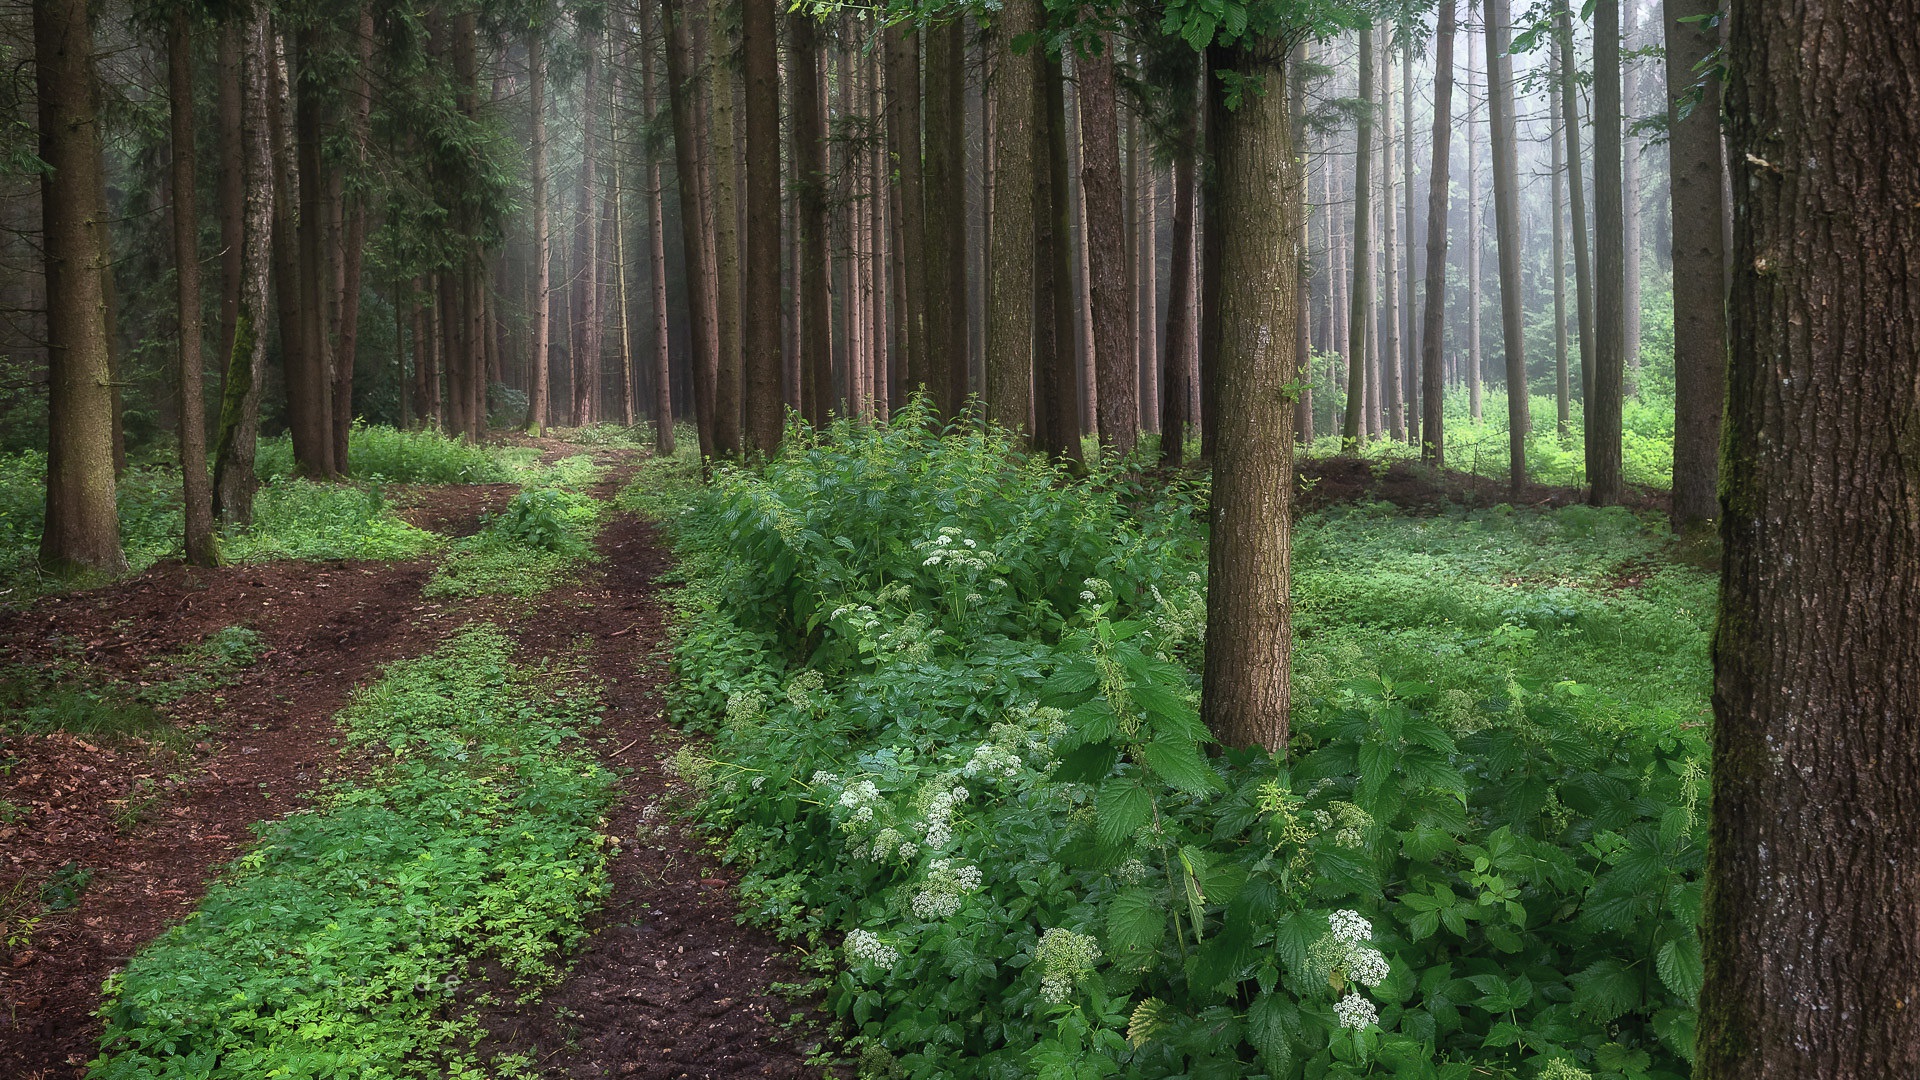 General 1920x1080 nature trees forest outdoors path